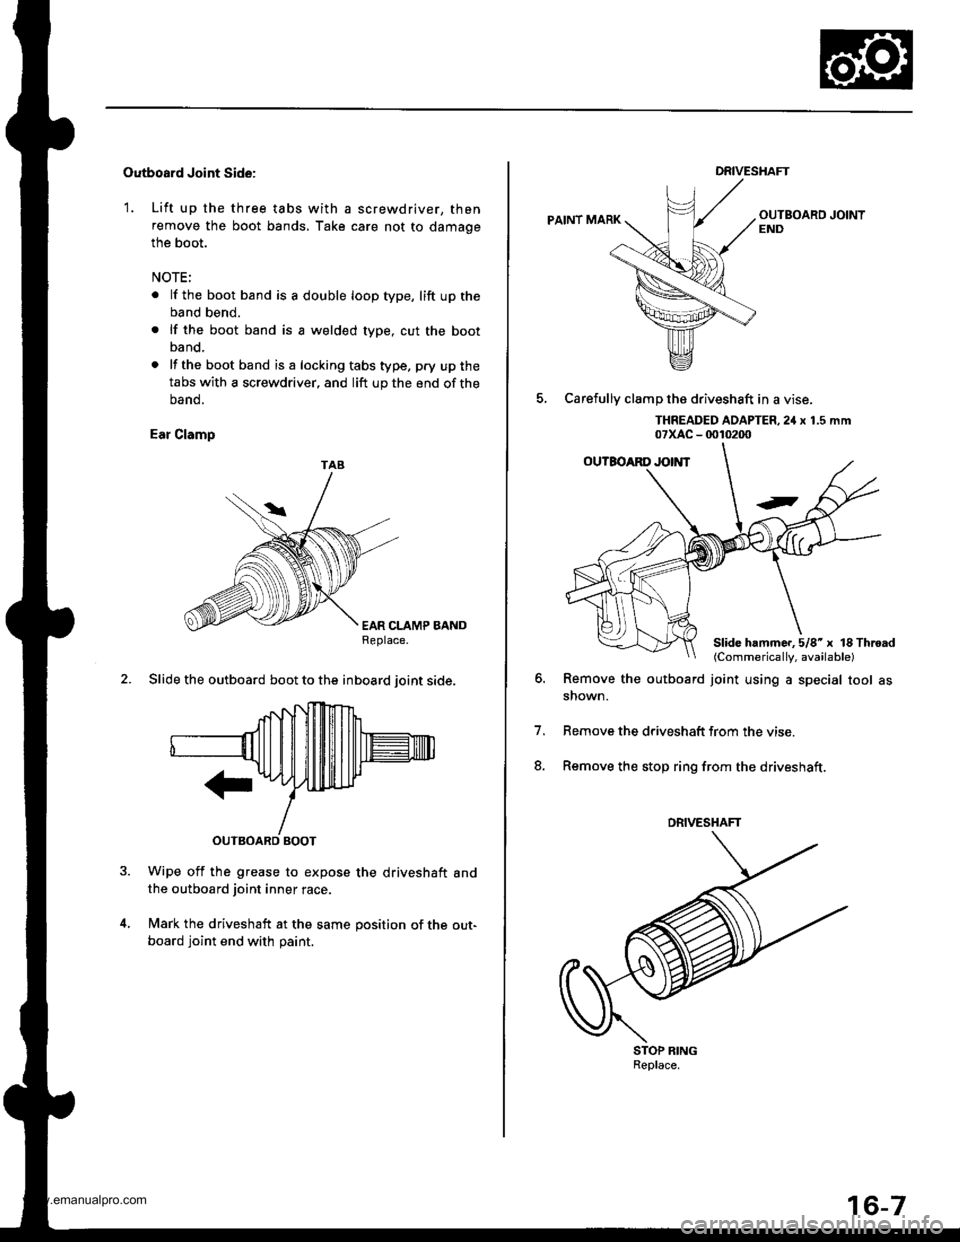 HONDA CR-V 1999 RD1-RD3 / 1.G Workshop Manual 
Outboard Joint Side:
1. Lift up the three tabs with a screwdriver, then
remove the boot bands, Take care not to damage
the boot.
NOTE:
. lf the boot band is a double loop type, lift up the
band bend.